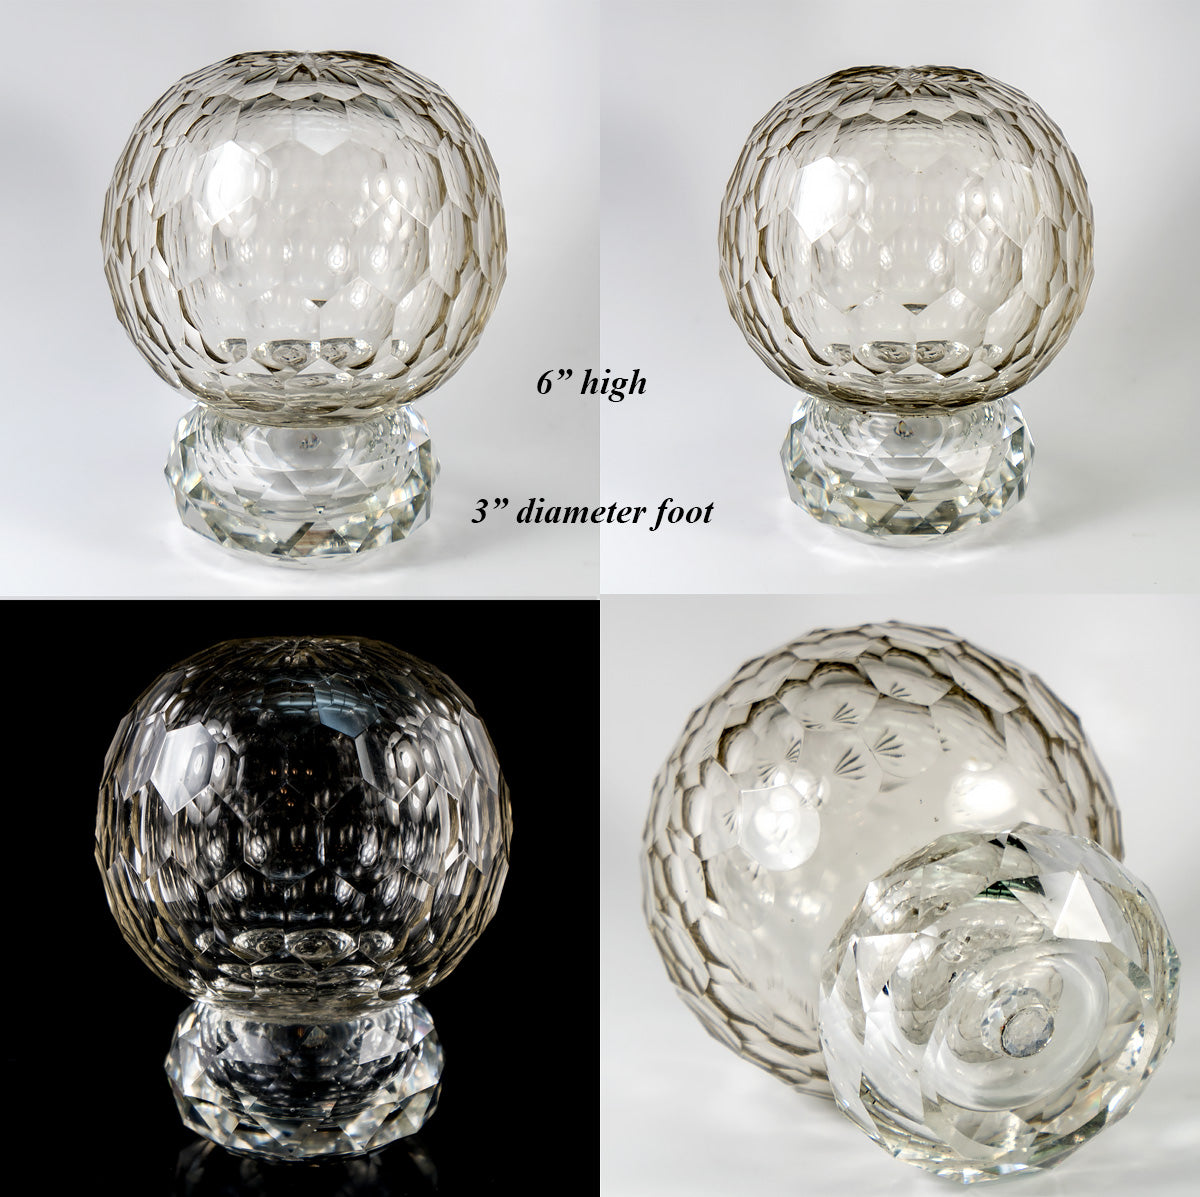 Superb Antique French Baccarat Crystal Newel Post Finial, 6" Tall with Convex Facets c. 1880s